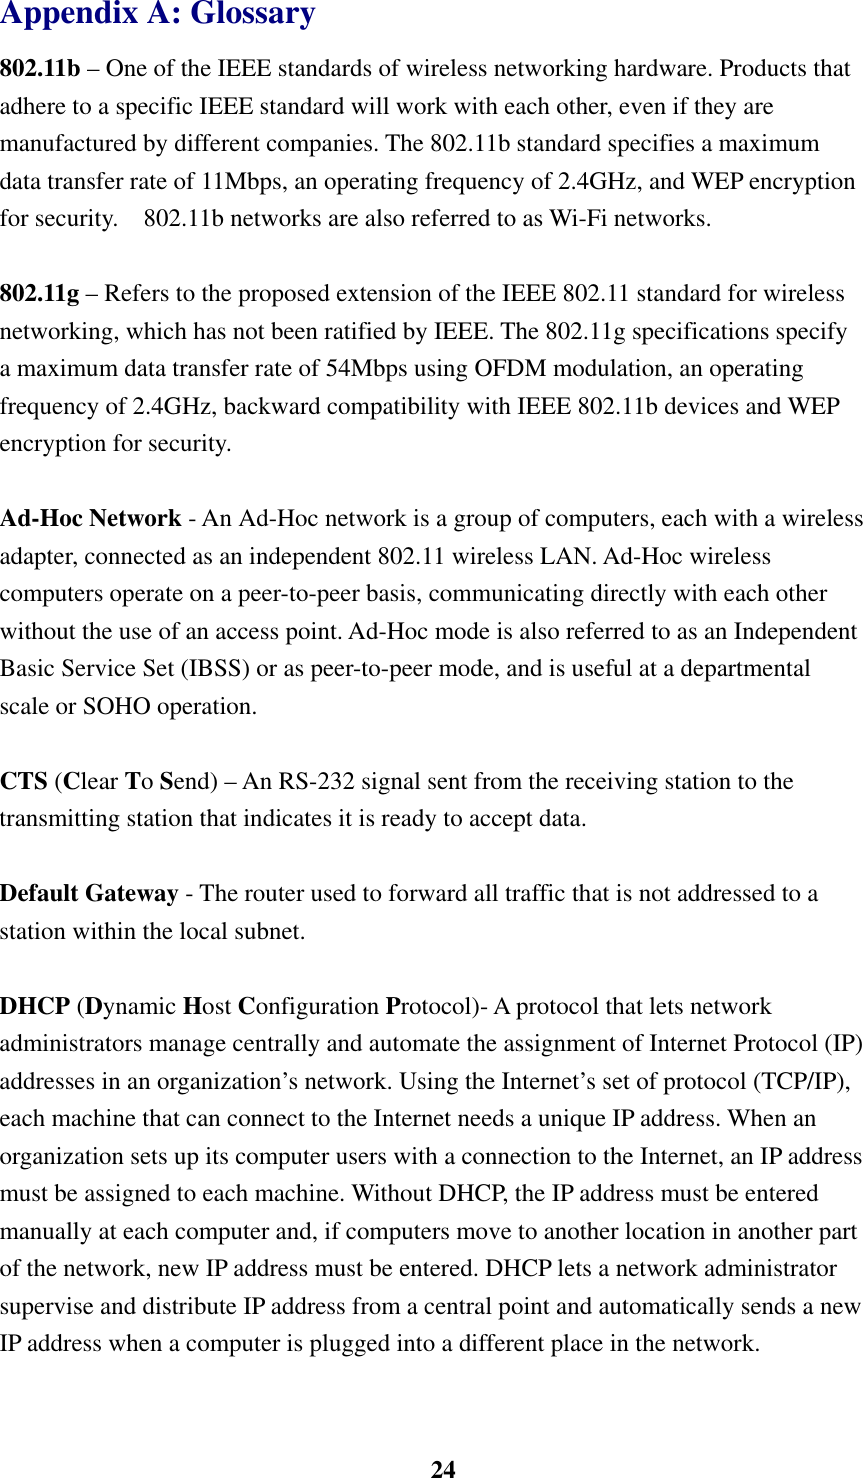    24Appendix A: Glossary 802.11b – One of the IEEE standards of wireless networking hardware. Products that adhere to a specific IEEE standard will work with each other, even if they are manufactured by different companies. The 802.11b standard specifies a maximum data transfer rate of 11Mbps, an operating frequency of 2.4GHz, and WEP encryption for security.    802.11b networks are also referred to as Wi-Fi networks.  802.11g – Refers to the proposed extension of the IEEE 802.11 standard for wireless networking, which has not been ratified by IEEE. The 802.11g specifications specify a maximum data transfer rate of 54Mbps using OFDM modulation, an operating frequency of 2.4GHz, backward compatibility with IEEE 802.11b devices and WEP encryption for security.  Ad-Hoc Network - An Ad-Hoc network is a group of computers, each with a wireless adapter, connected as an independent 802.11 wireless LAN. Ad-Hoc wireless computers operate on a peer-to-peer basis, communicating directly with each other without the use of an access point. Ad-Hoc mode is also referred to as an Independent Basic Service Set (IBSS) or as peer-to-peer mode, and is useful at a departmental scale or SOHO operation.  CTS (Clear To Send) – An RS-232 signal sent from the receiving station to the transmitting station that indicates it is ready to accept data.  Default Gateway - The router used to forward all traffic that is not addressed to a station within the local subnet.  DHCP (Dynamic Host Configuration Protocol)- A protocol that lets network administrators manage centrally and automate the assignment of Internet Protocol (IP) addresses in an organization’s network. Using the Internet’s set of protocol (TCP/IP), each machine that can connect to the Internet needs a unique IP address. When an organization sets up its computer users with a connection to the Internet, an IP address must be assigned to each machine. Without DHCP, the IP address must be entered manually at each computer and, if computers move to another location in another part of the network, new IP address must be entered. DHCP lets a network administrator supervise and distribute IP address from a central point and automatically sends a new IP address when a computer is plugged into a different place in the network.  